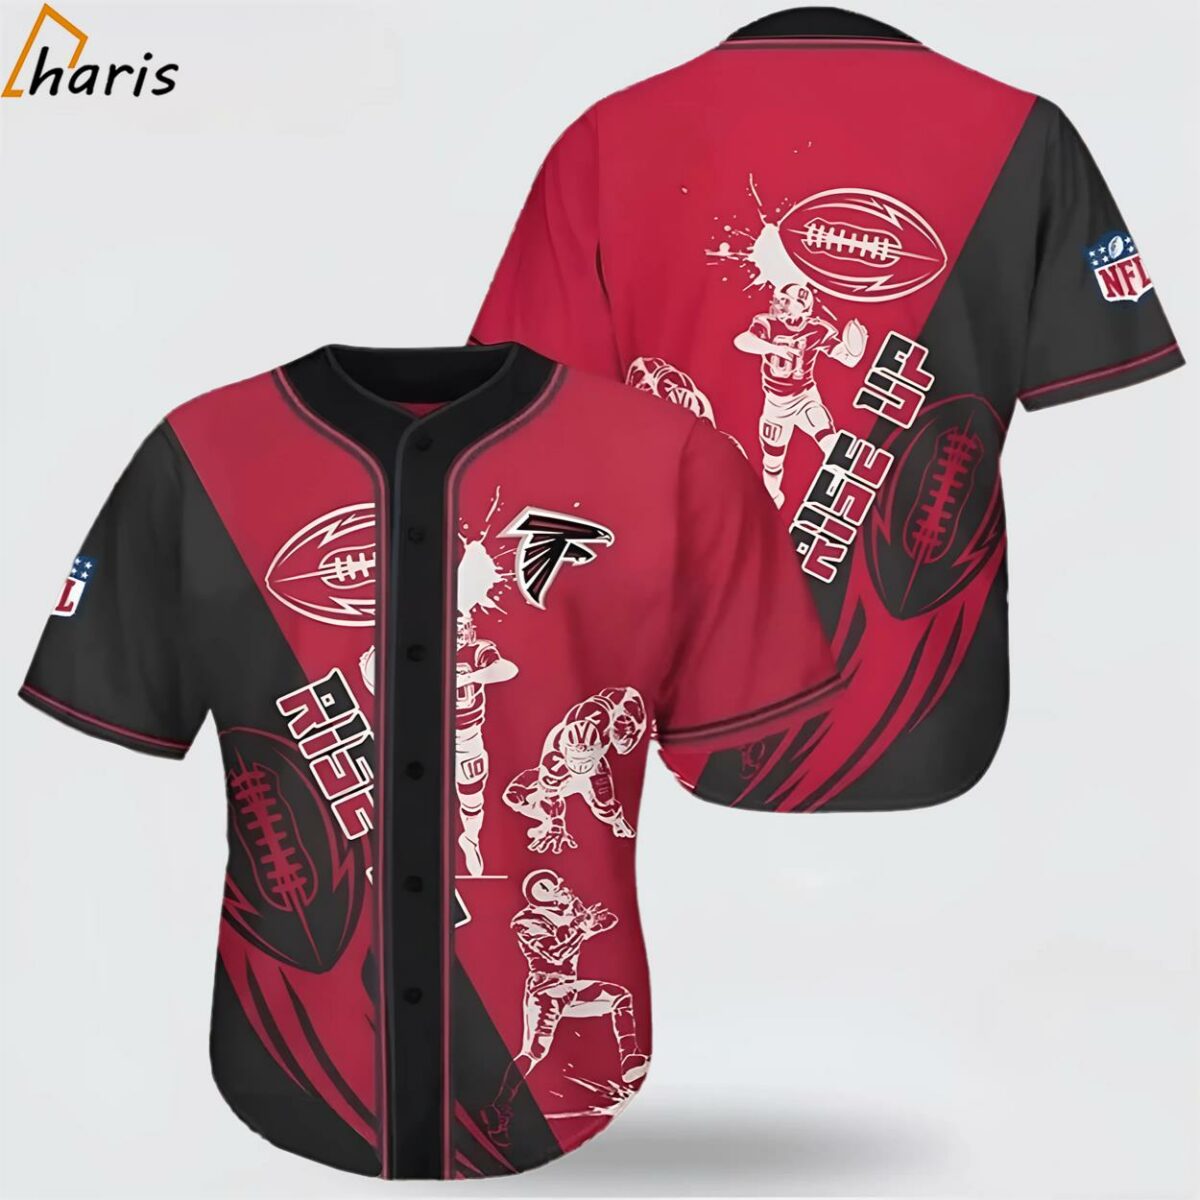 NFL Atlanta Falcons Baseball Jersey Stand Out With Official Team Spirit 1 jersey